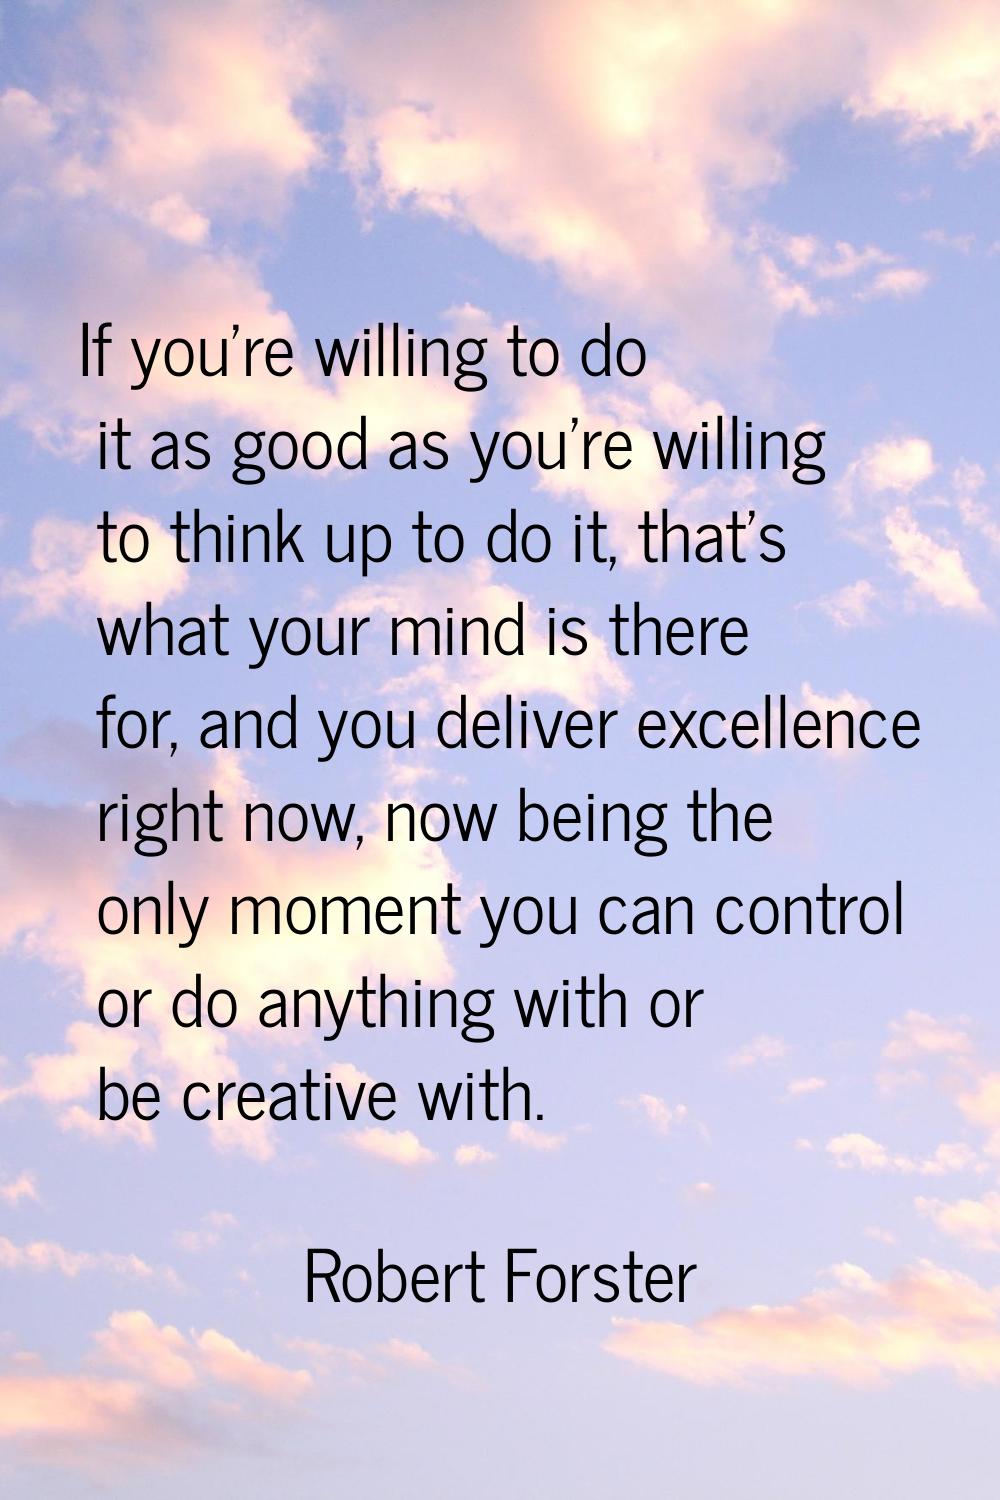 If you're willing to do it as good as you're willing to think up to do it, that's what your mind is